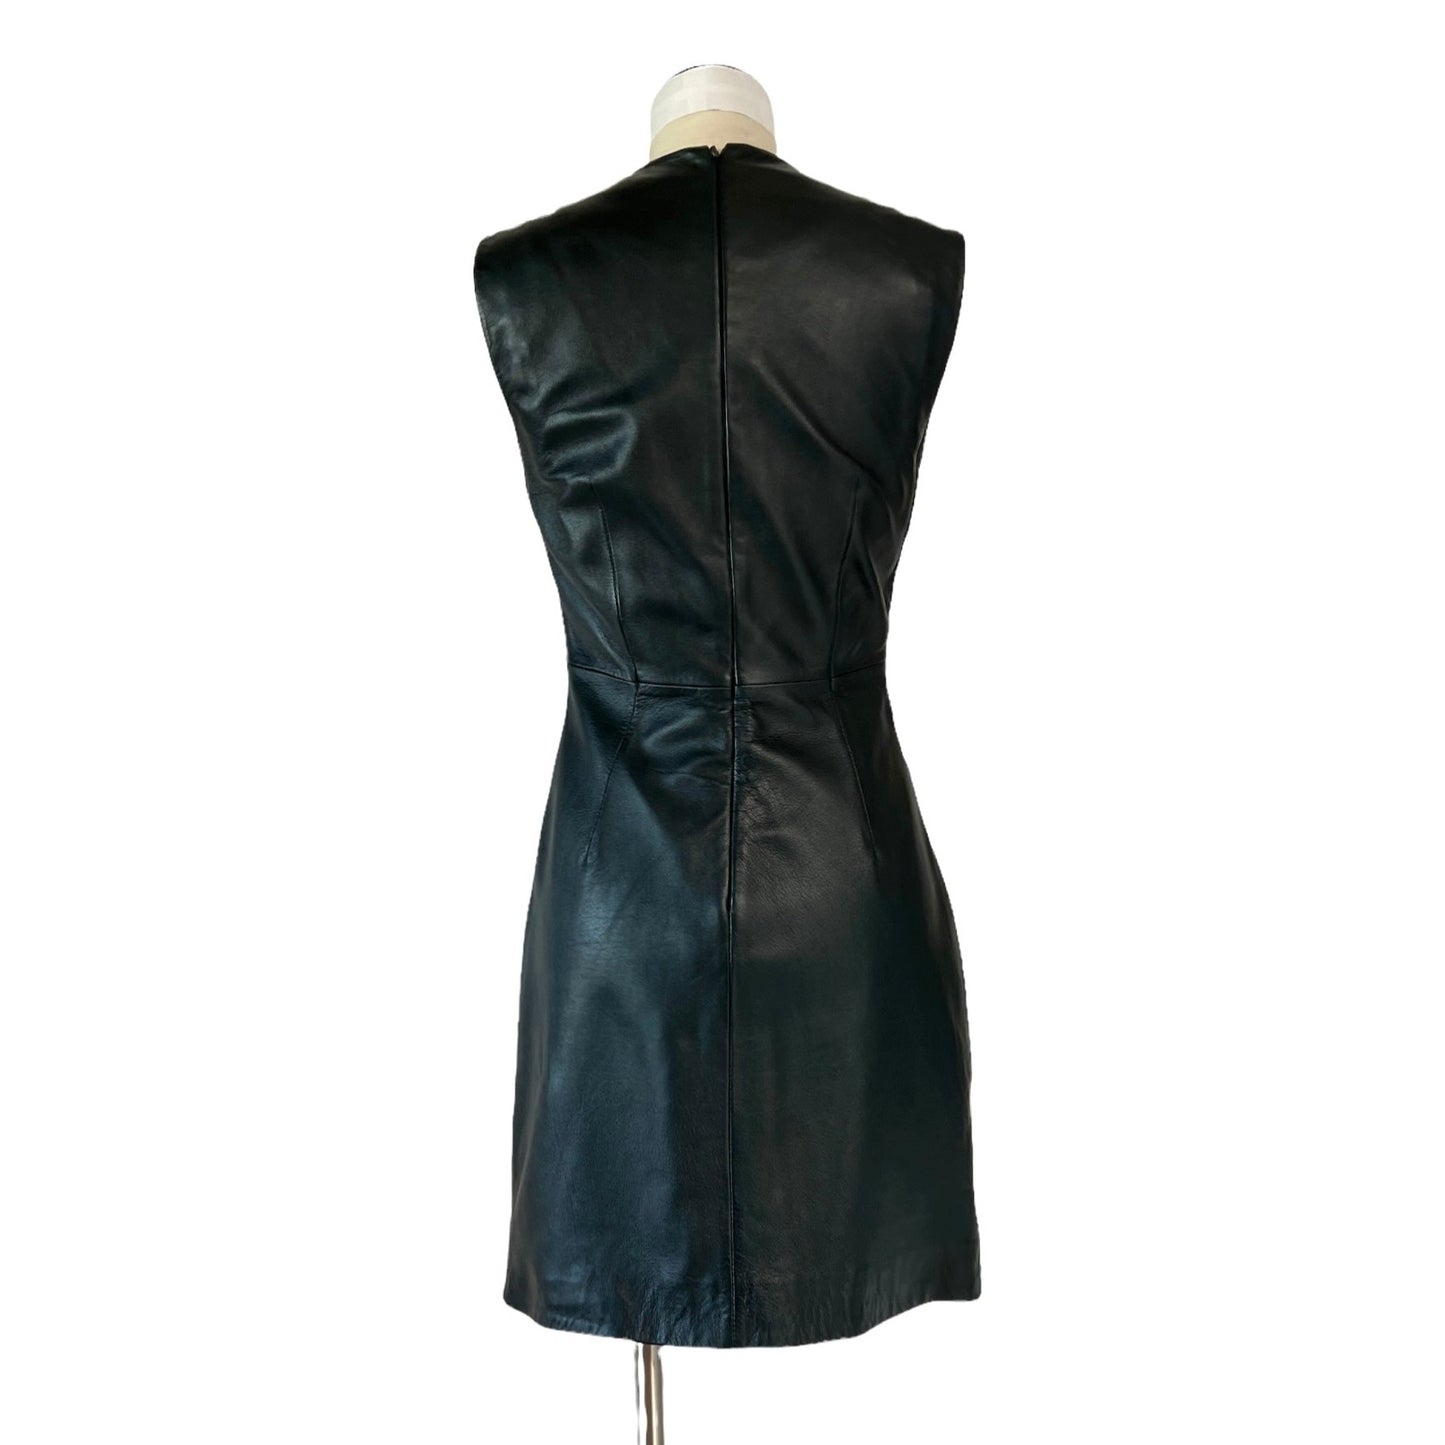 Green Leather Dress - S